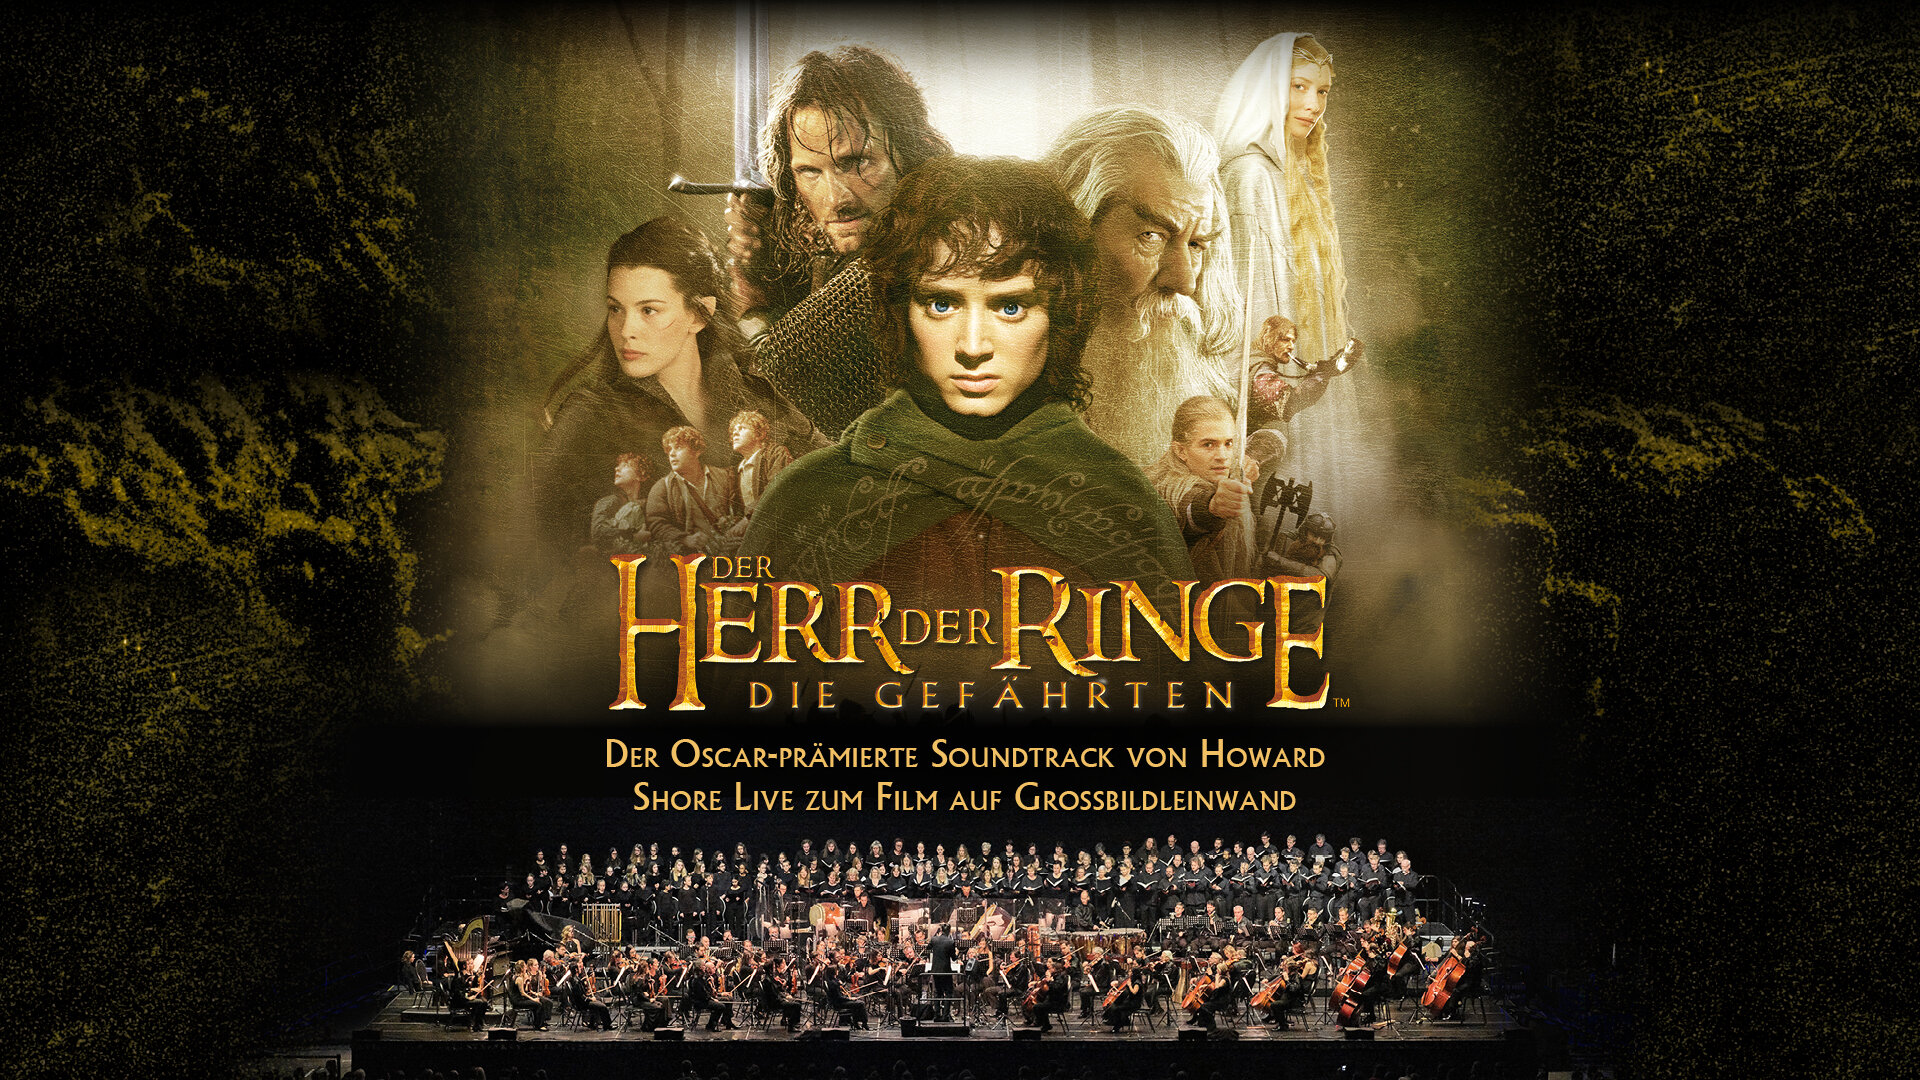 The Lord of the Rings in Concert - Helm's Deep - Forth Èorlingas - YouTube